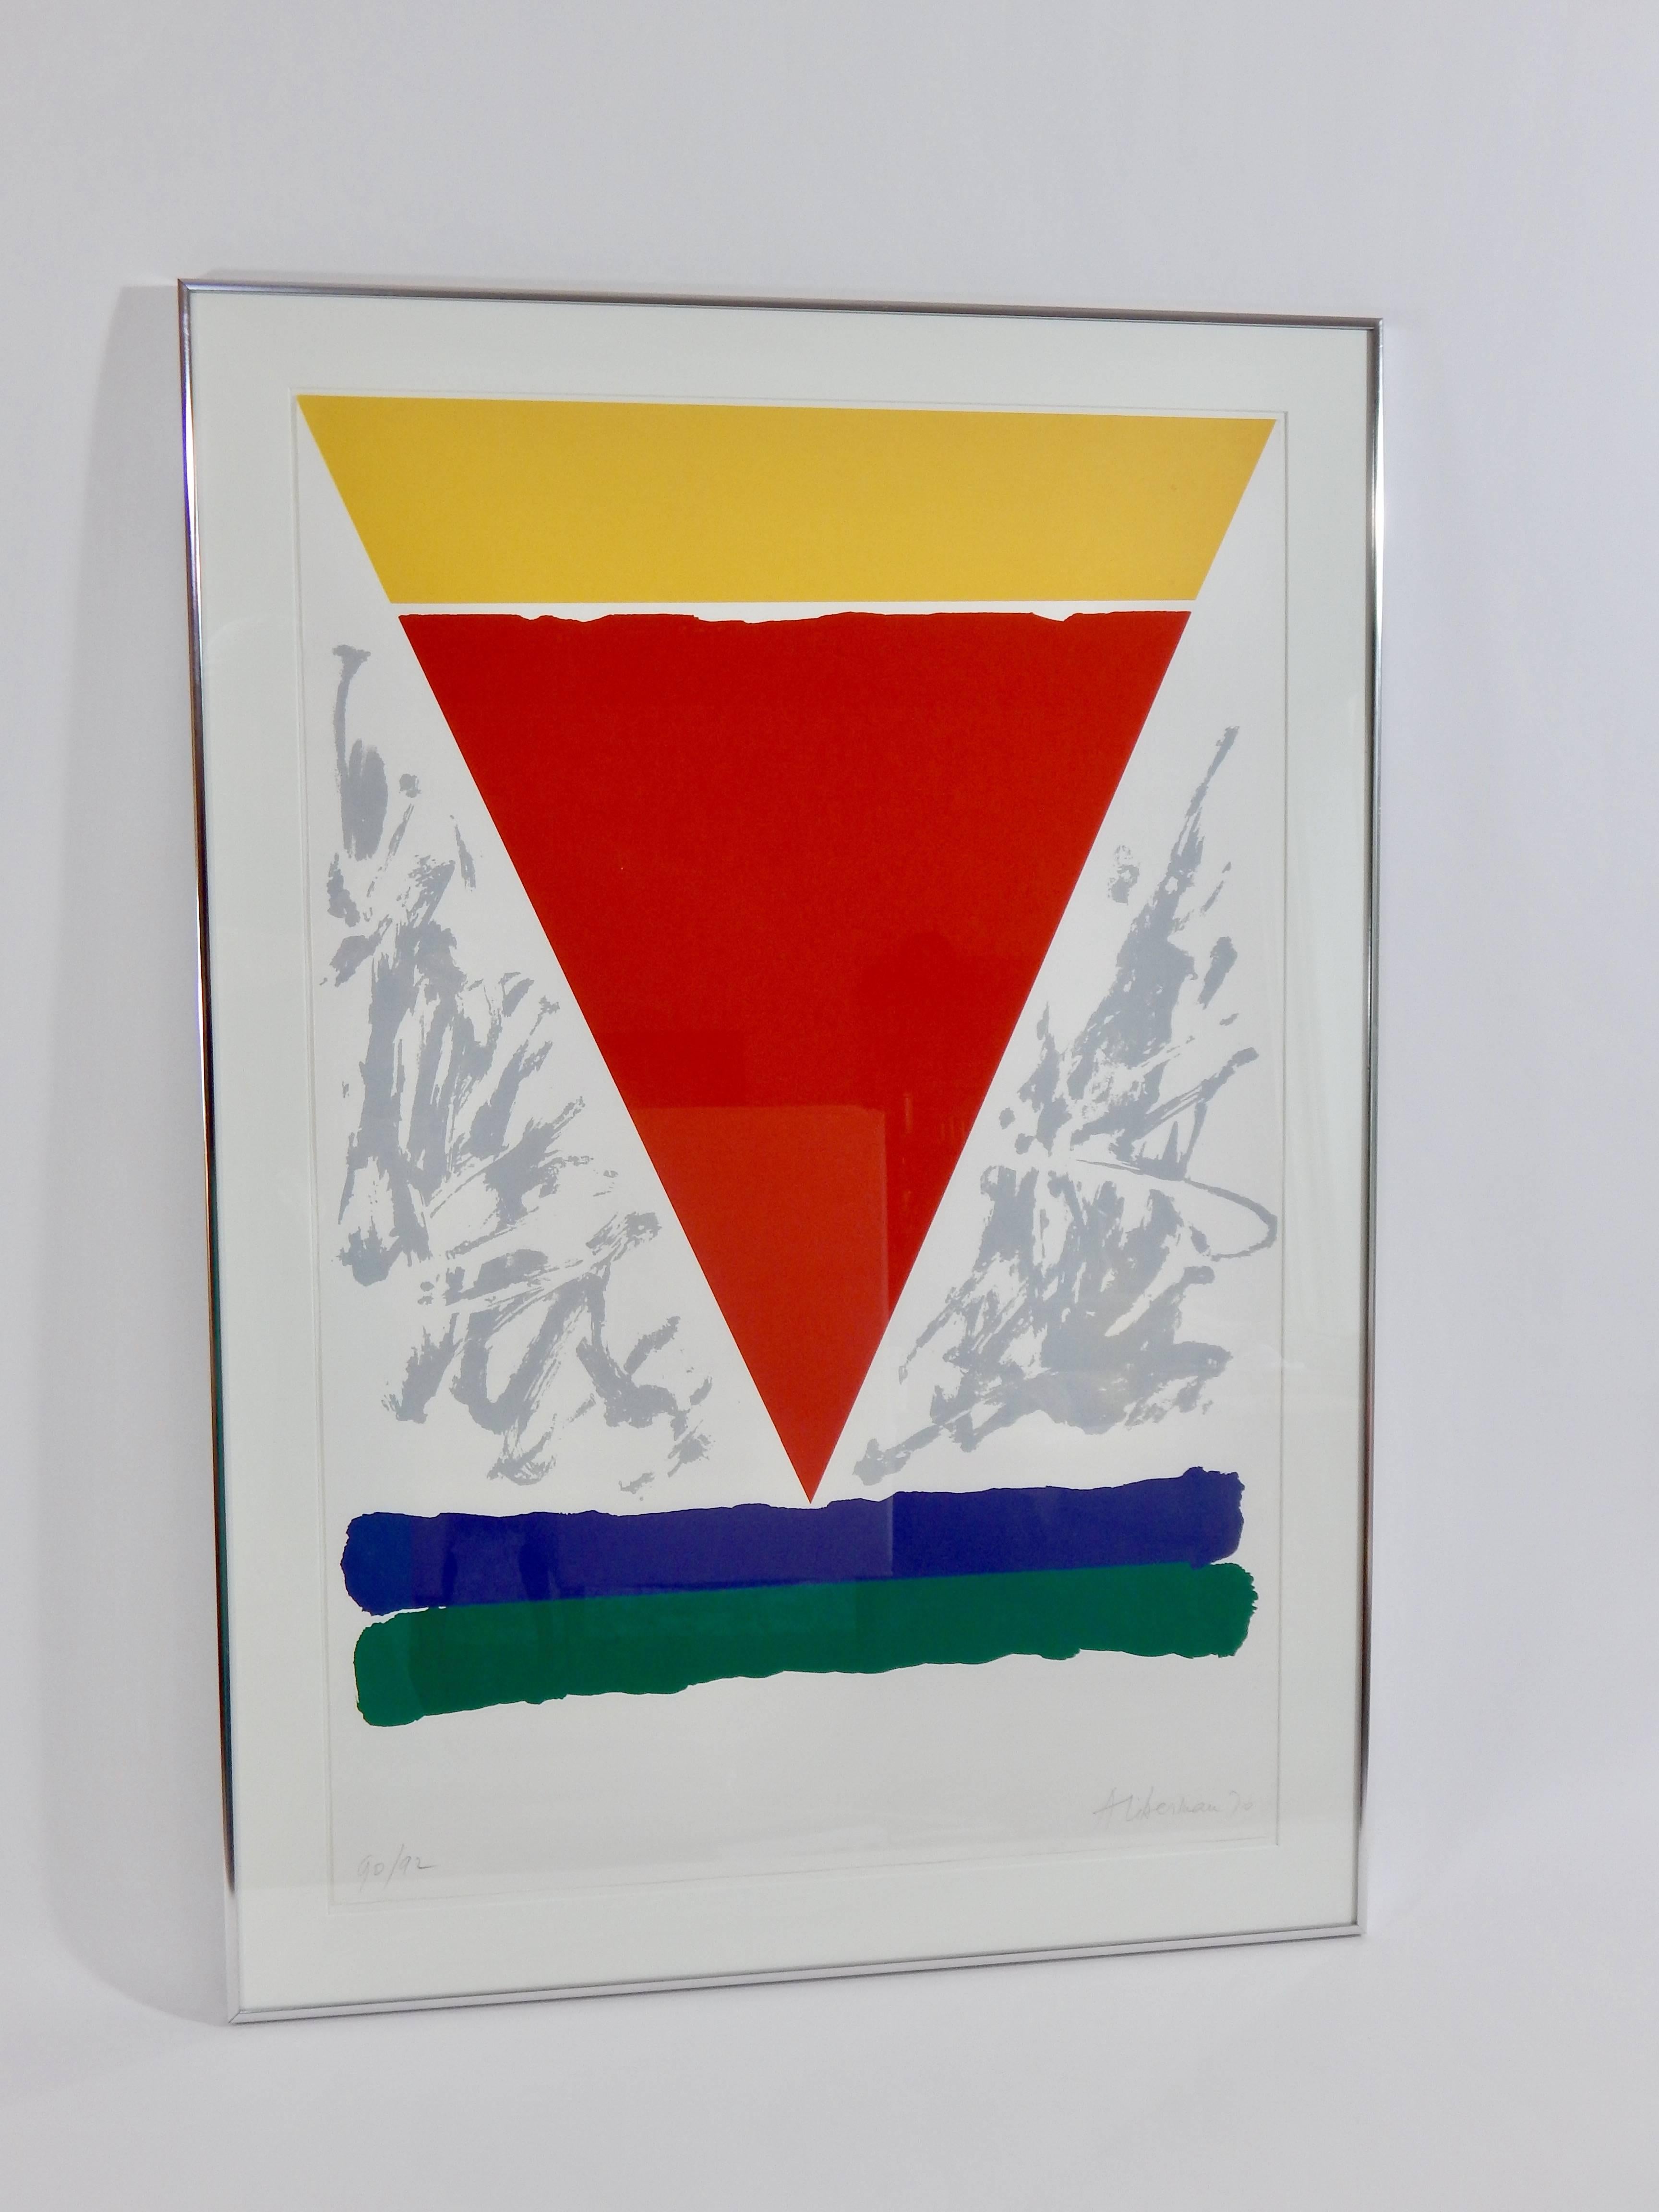 Alexander Liberman, 1970. Signed and numbered lithograph. Bright colors of red, yellow, blue, green and silver. Chrome frame.